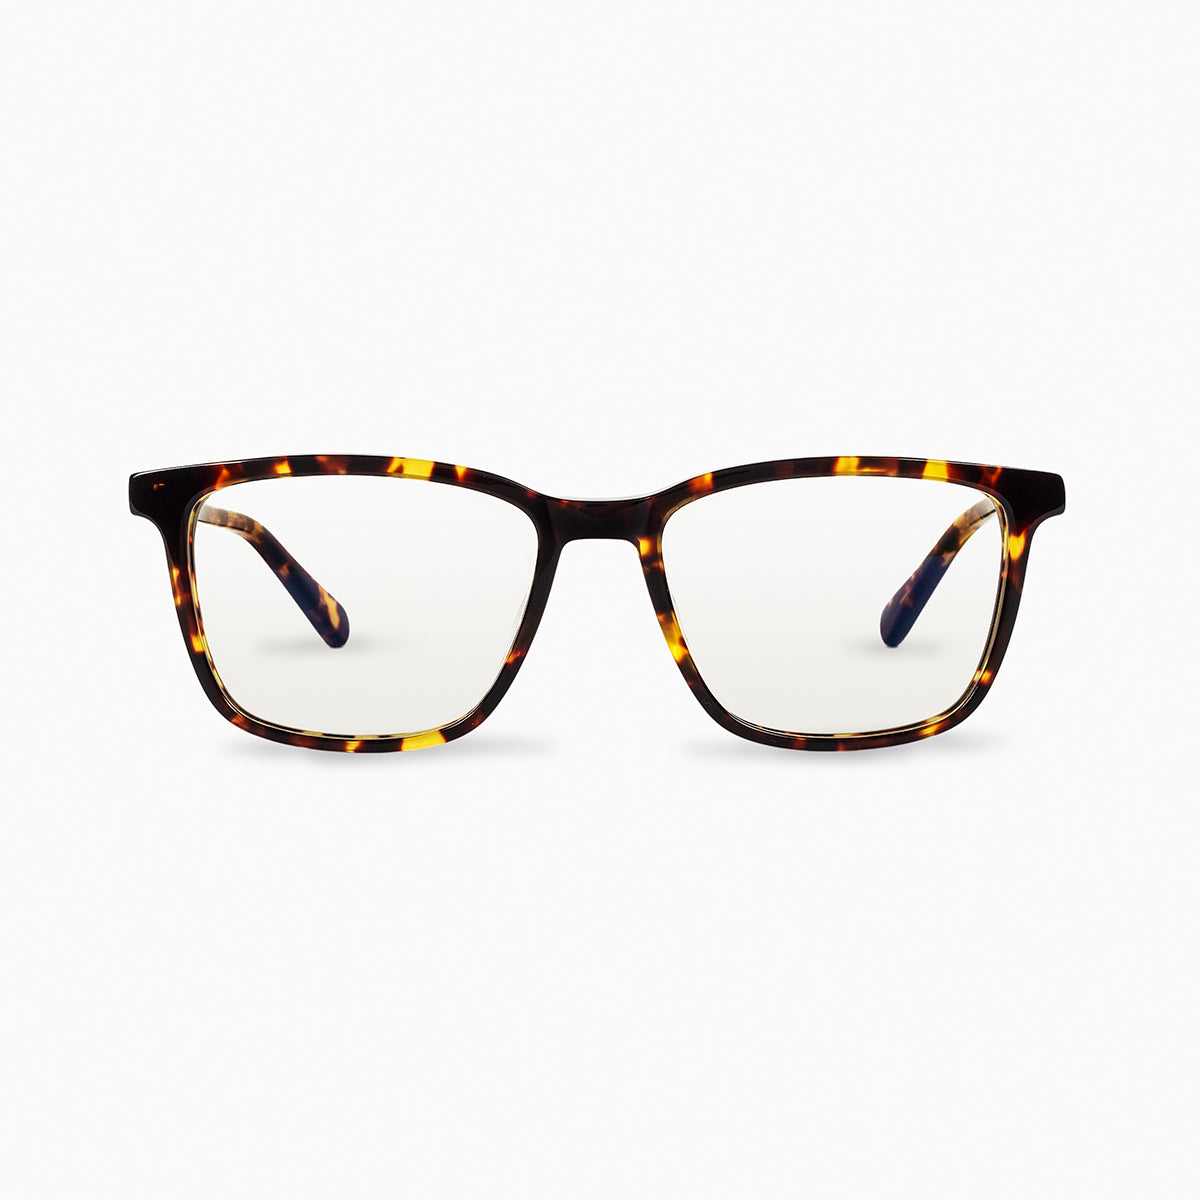 Blue Light Glasses | Tort | Product Image | Uncommon James Home